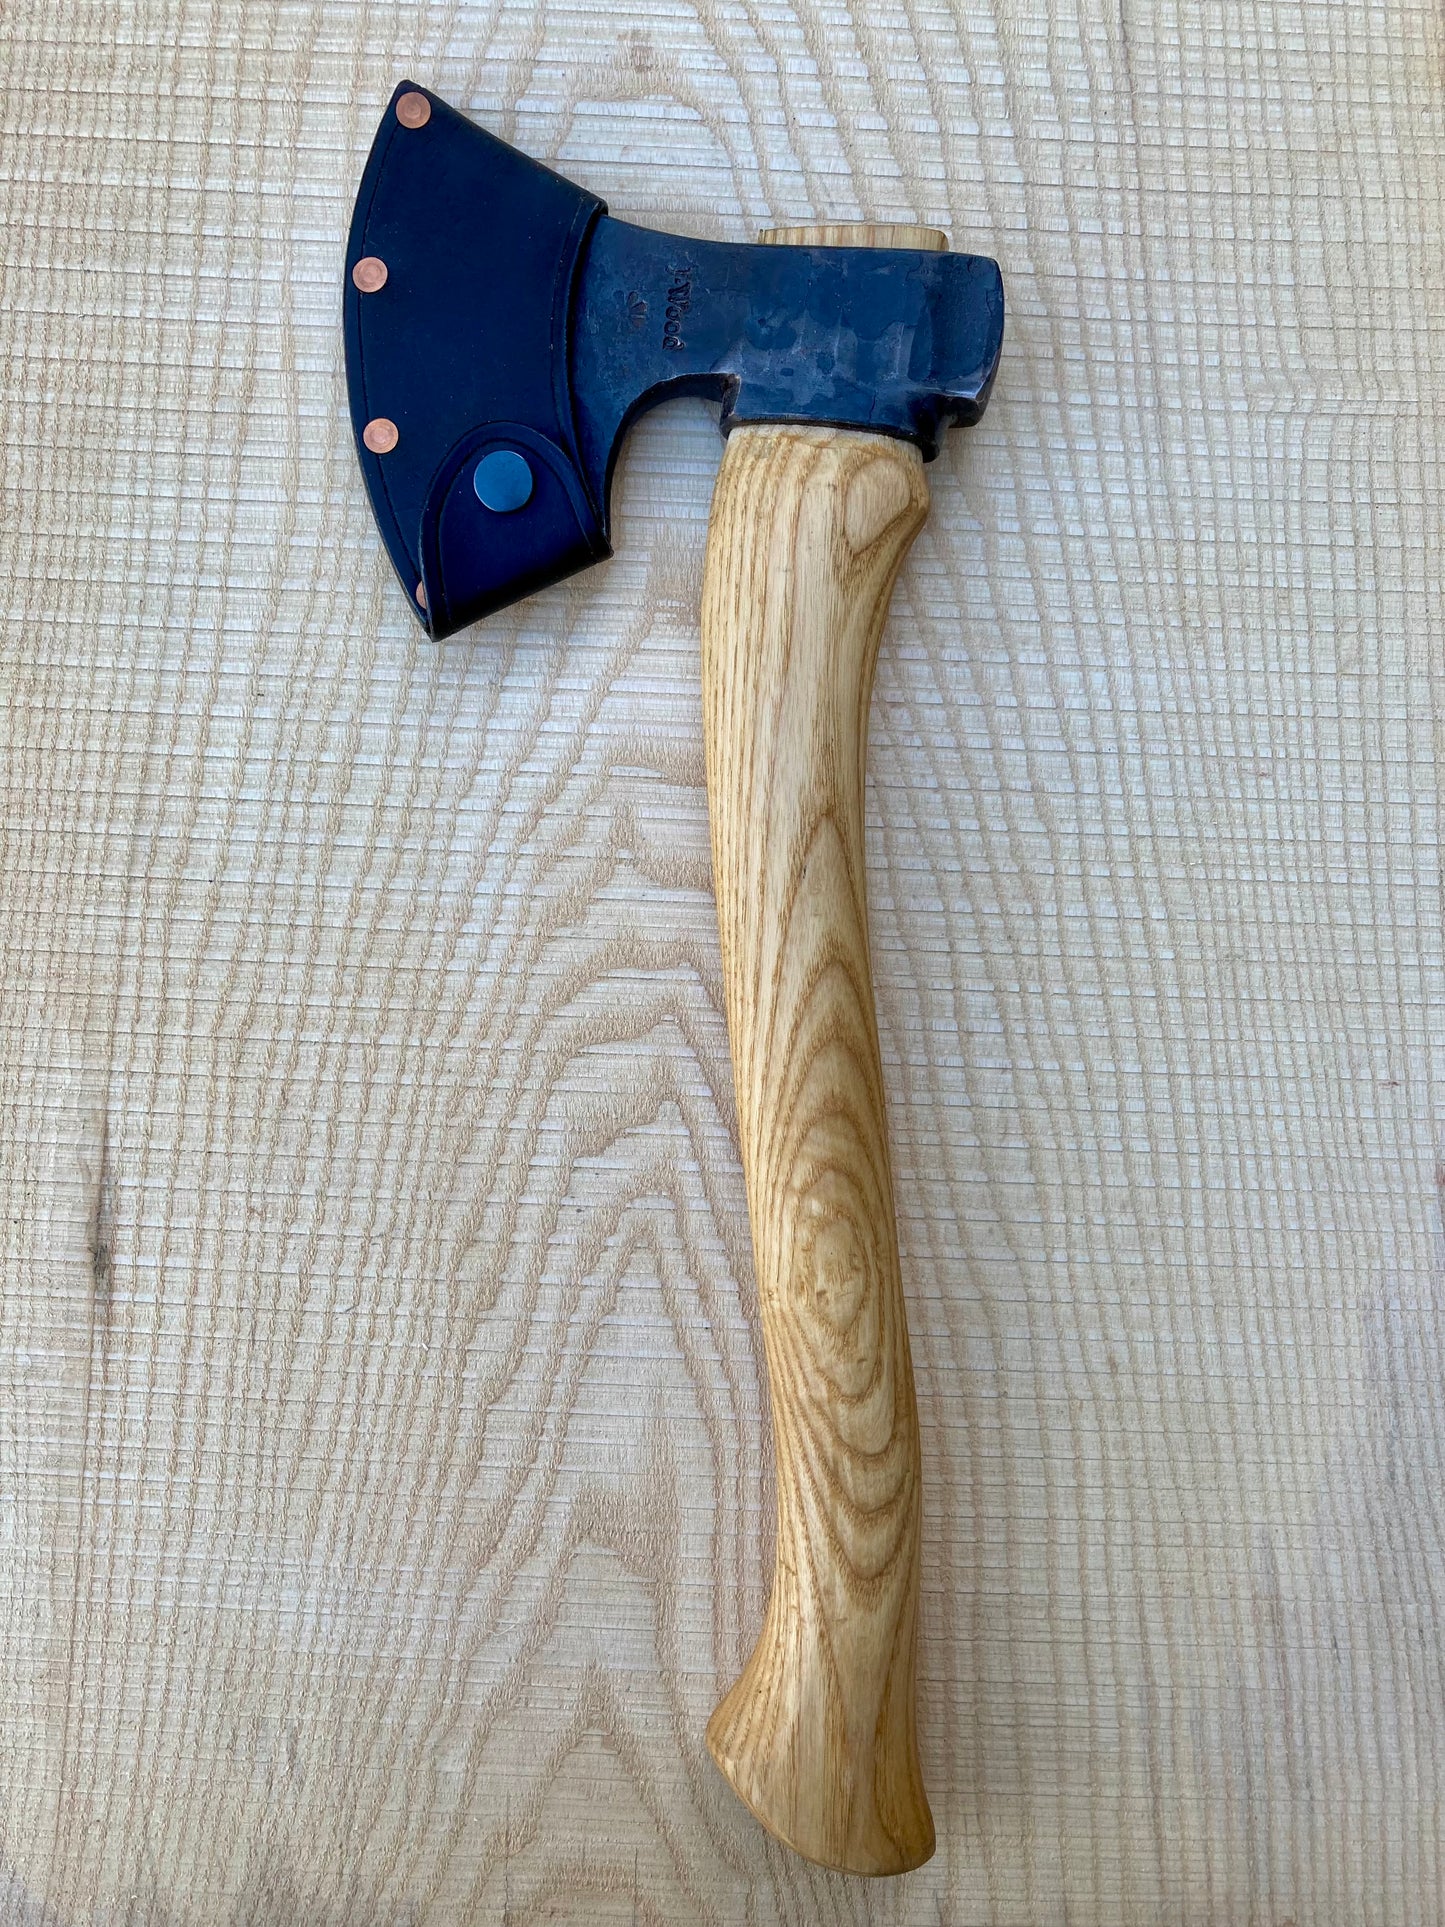 James Wood - Socketed Carving Axe